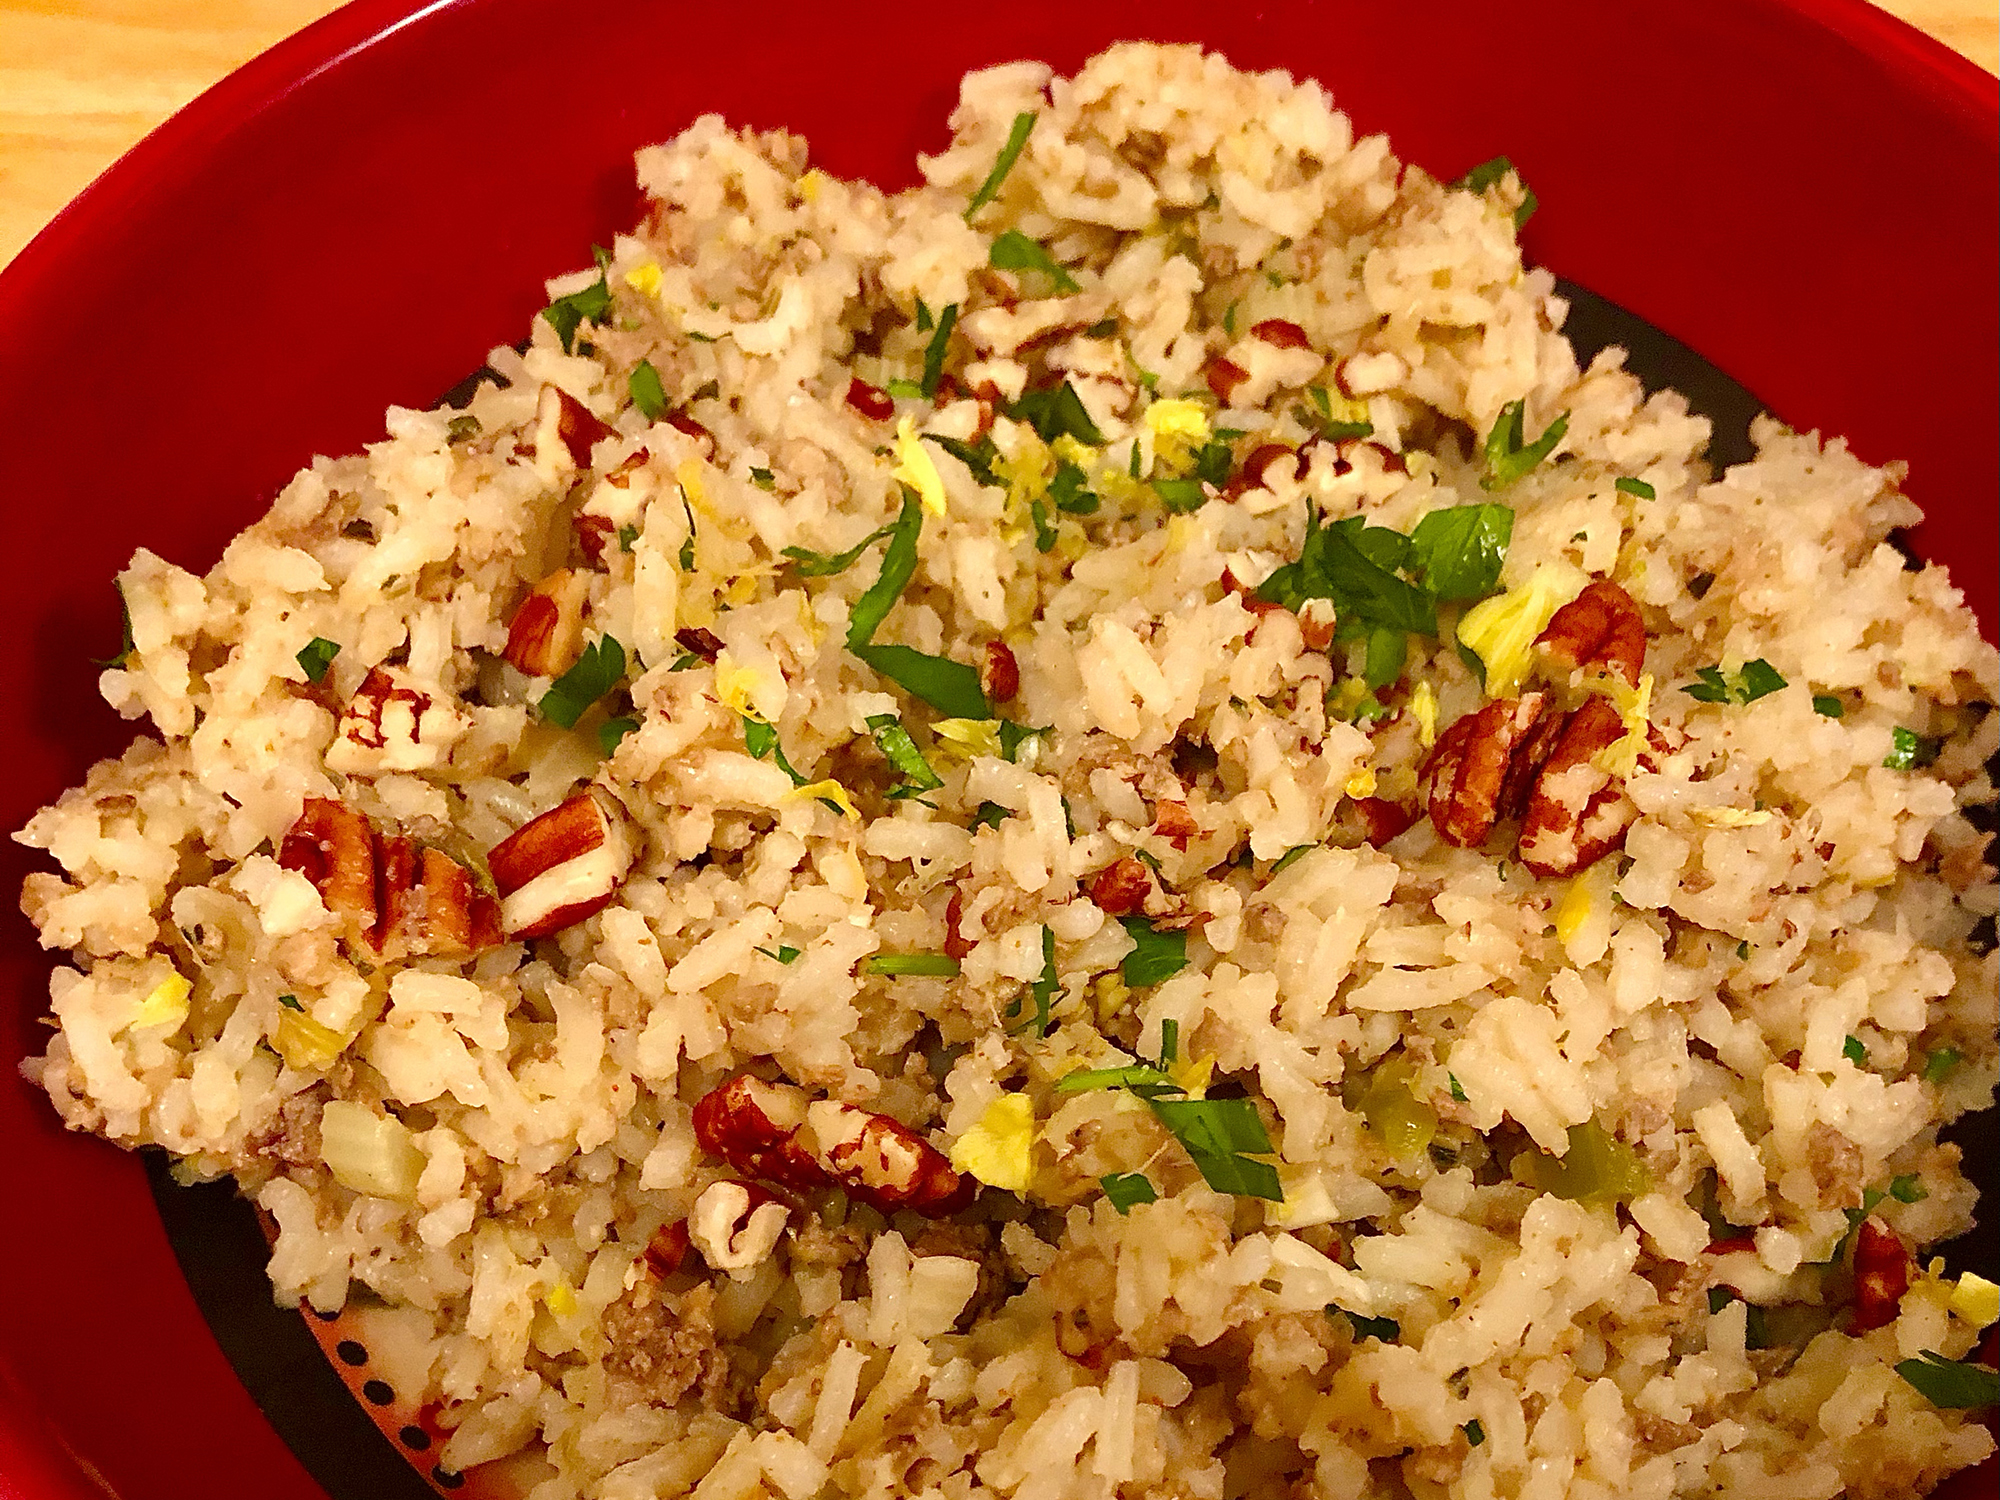 close up view of Southern Dirty Rice garnished with fresh herbs and nuts, in a red bowl